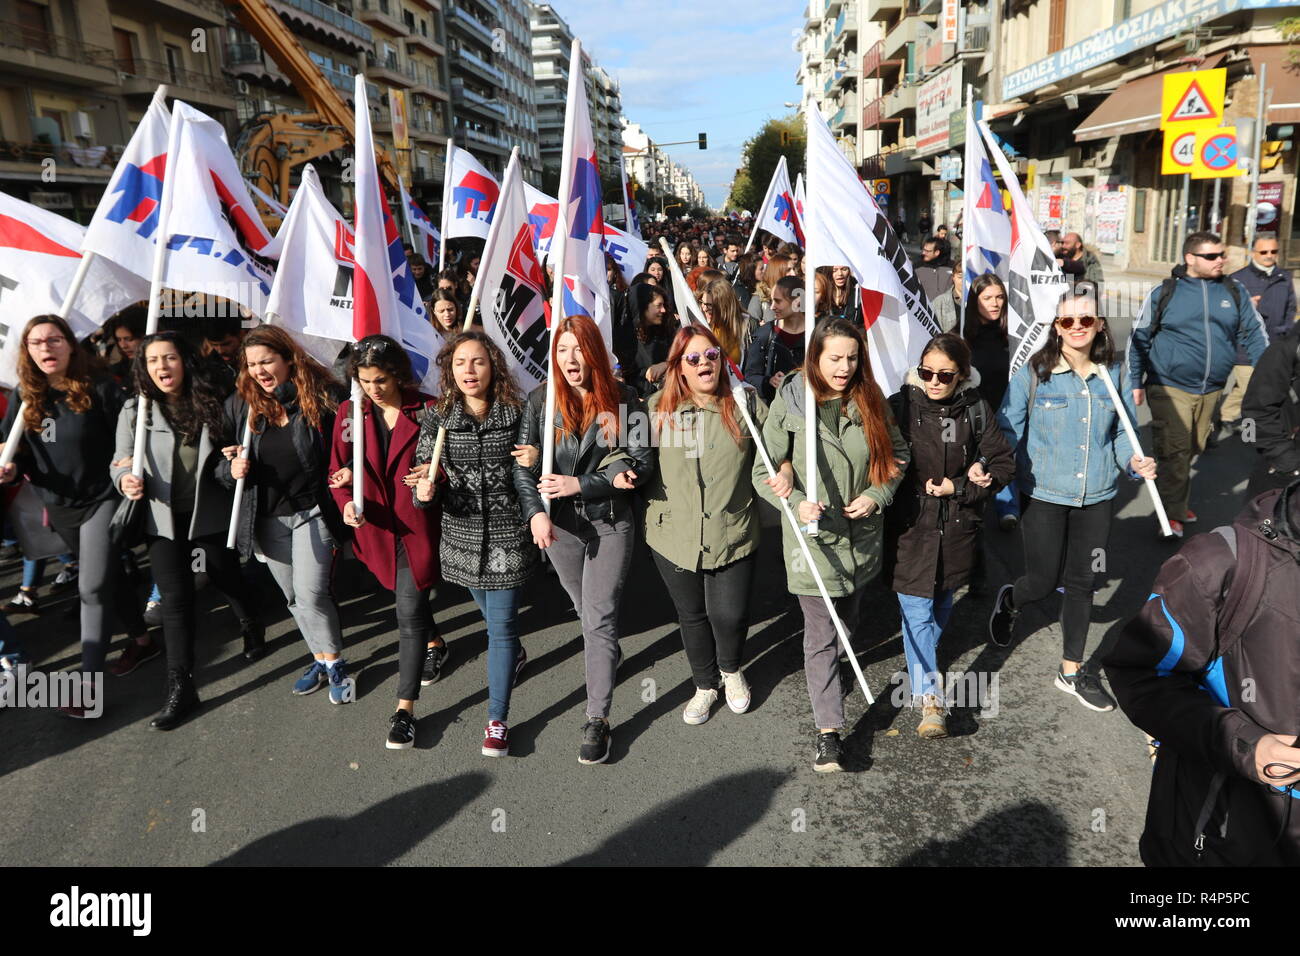 Thessaloniki, Greece, 28th November, 2018.  Students from the communist-affiliated trade union PAME take part in a demonstration during a 24-hour walkout staged by Greece's largest private sector union GSEE  against planned pension cuts and to demand the reversal of labour reforms implemented under the country's third bailout. The strike by the GSEE union is the second major strike since Greece exited its bailout programm in August. Credit : Orhan Tsolak / Alamy Live News. Stock Photo